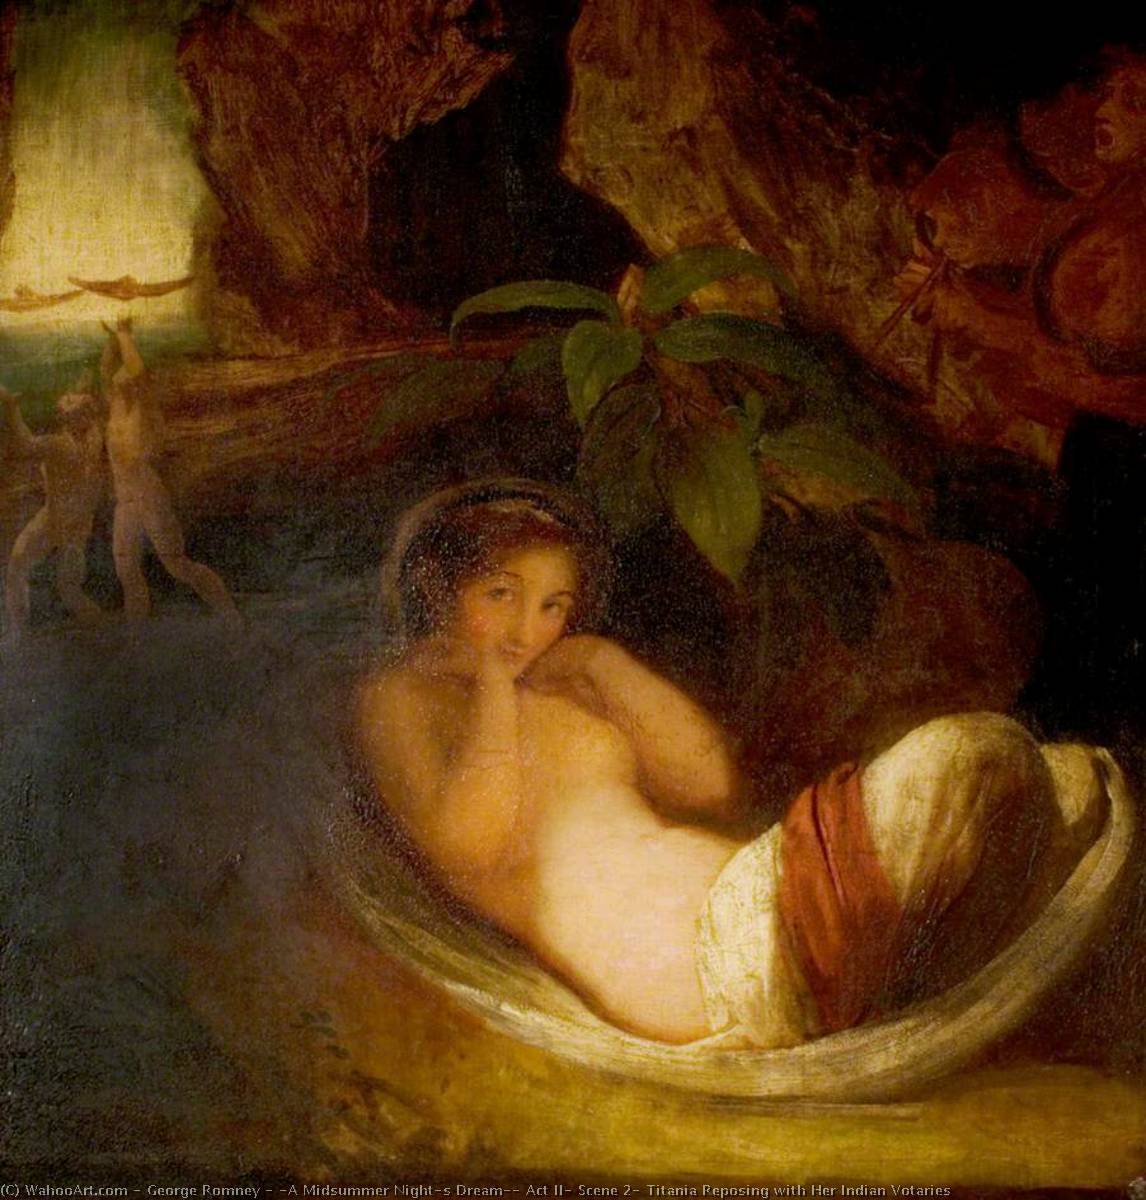 WikiOO.org - Encyclopedia of Fine Arts - Maalaus, taideteos George Romney - 'A Midsummer Night's Dream', Act II, Scene 2, Titania Reposing with Her Indian Votaries